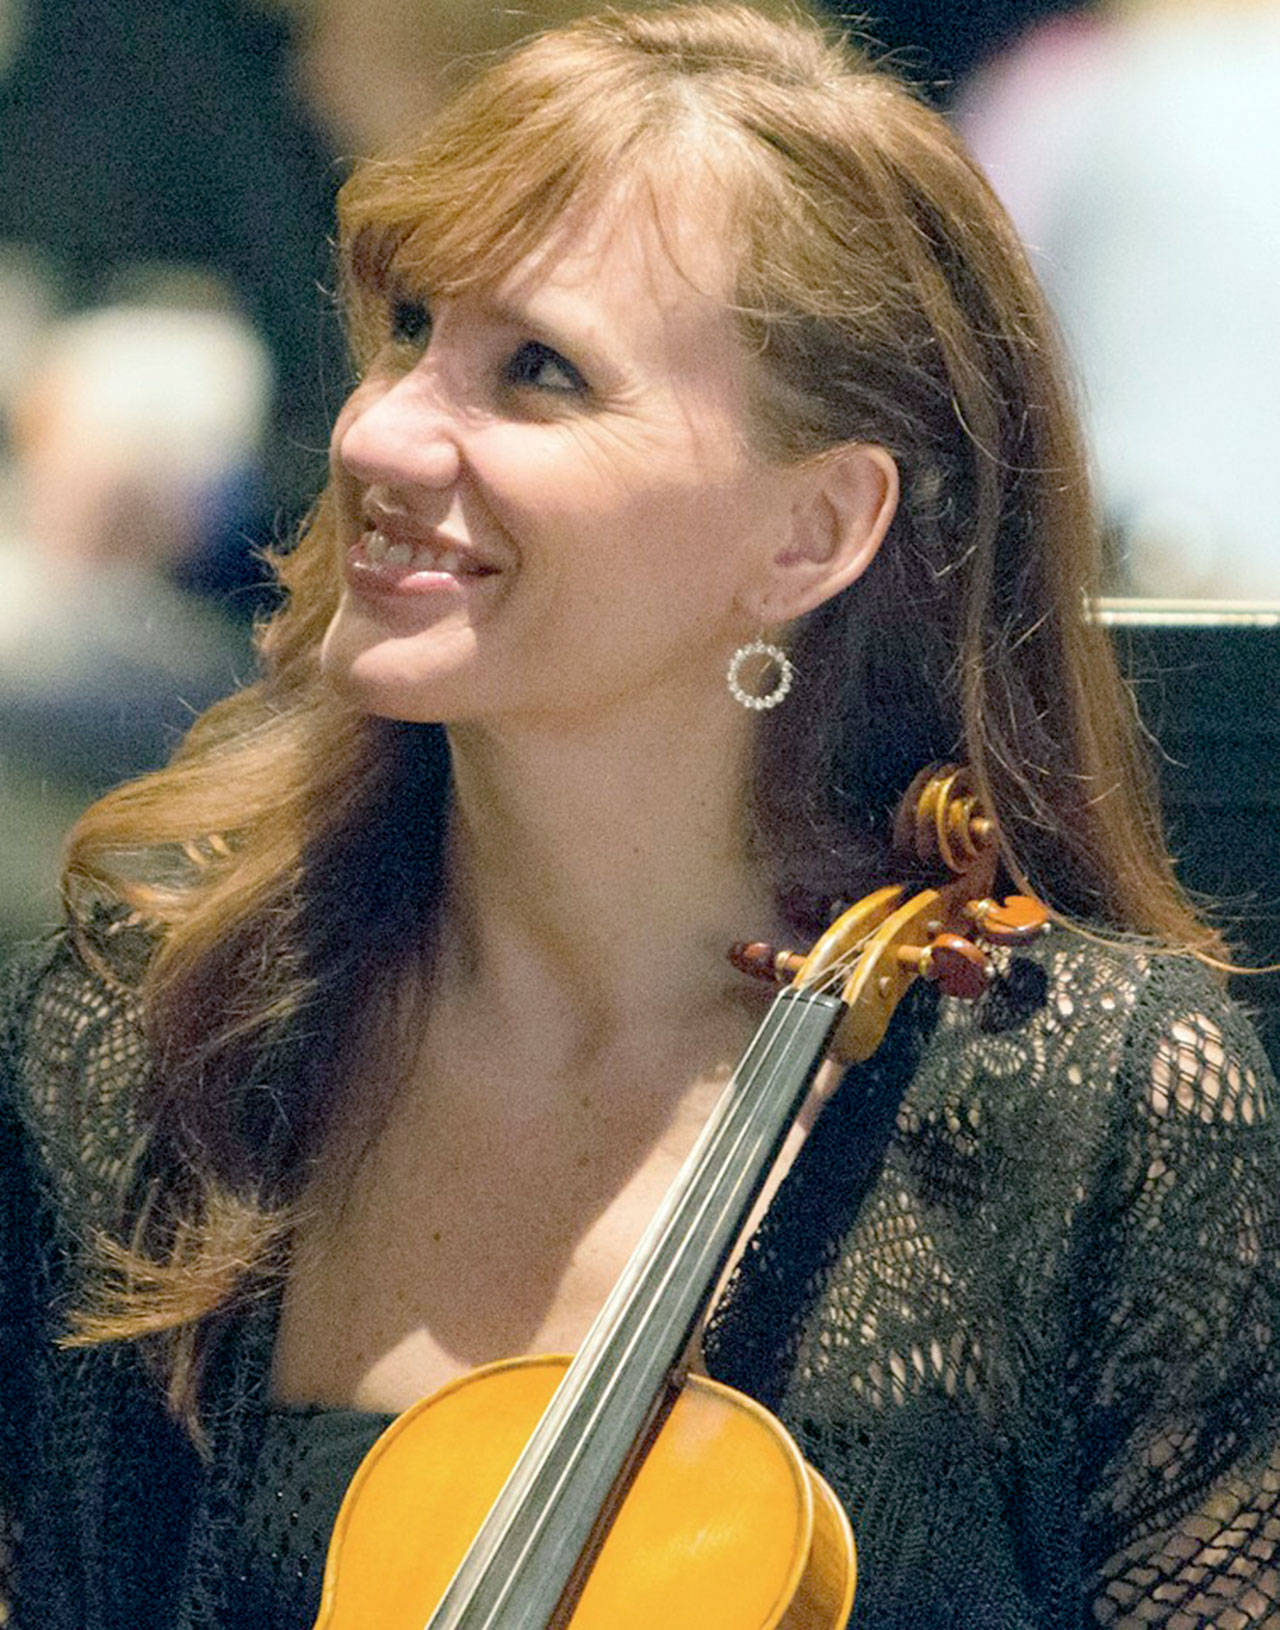 Denise Dillenbeck will perform in concerts today and Saturday.